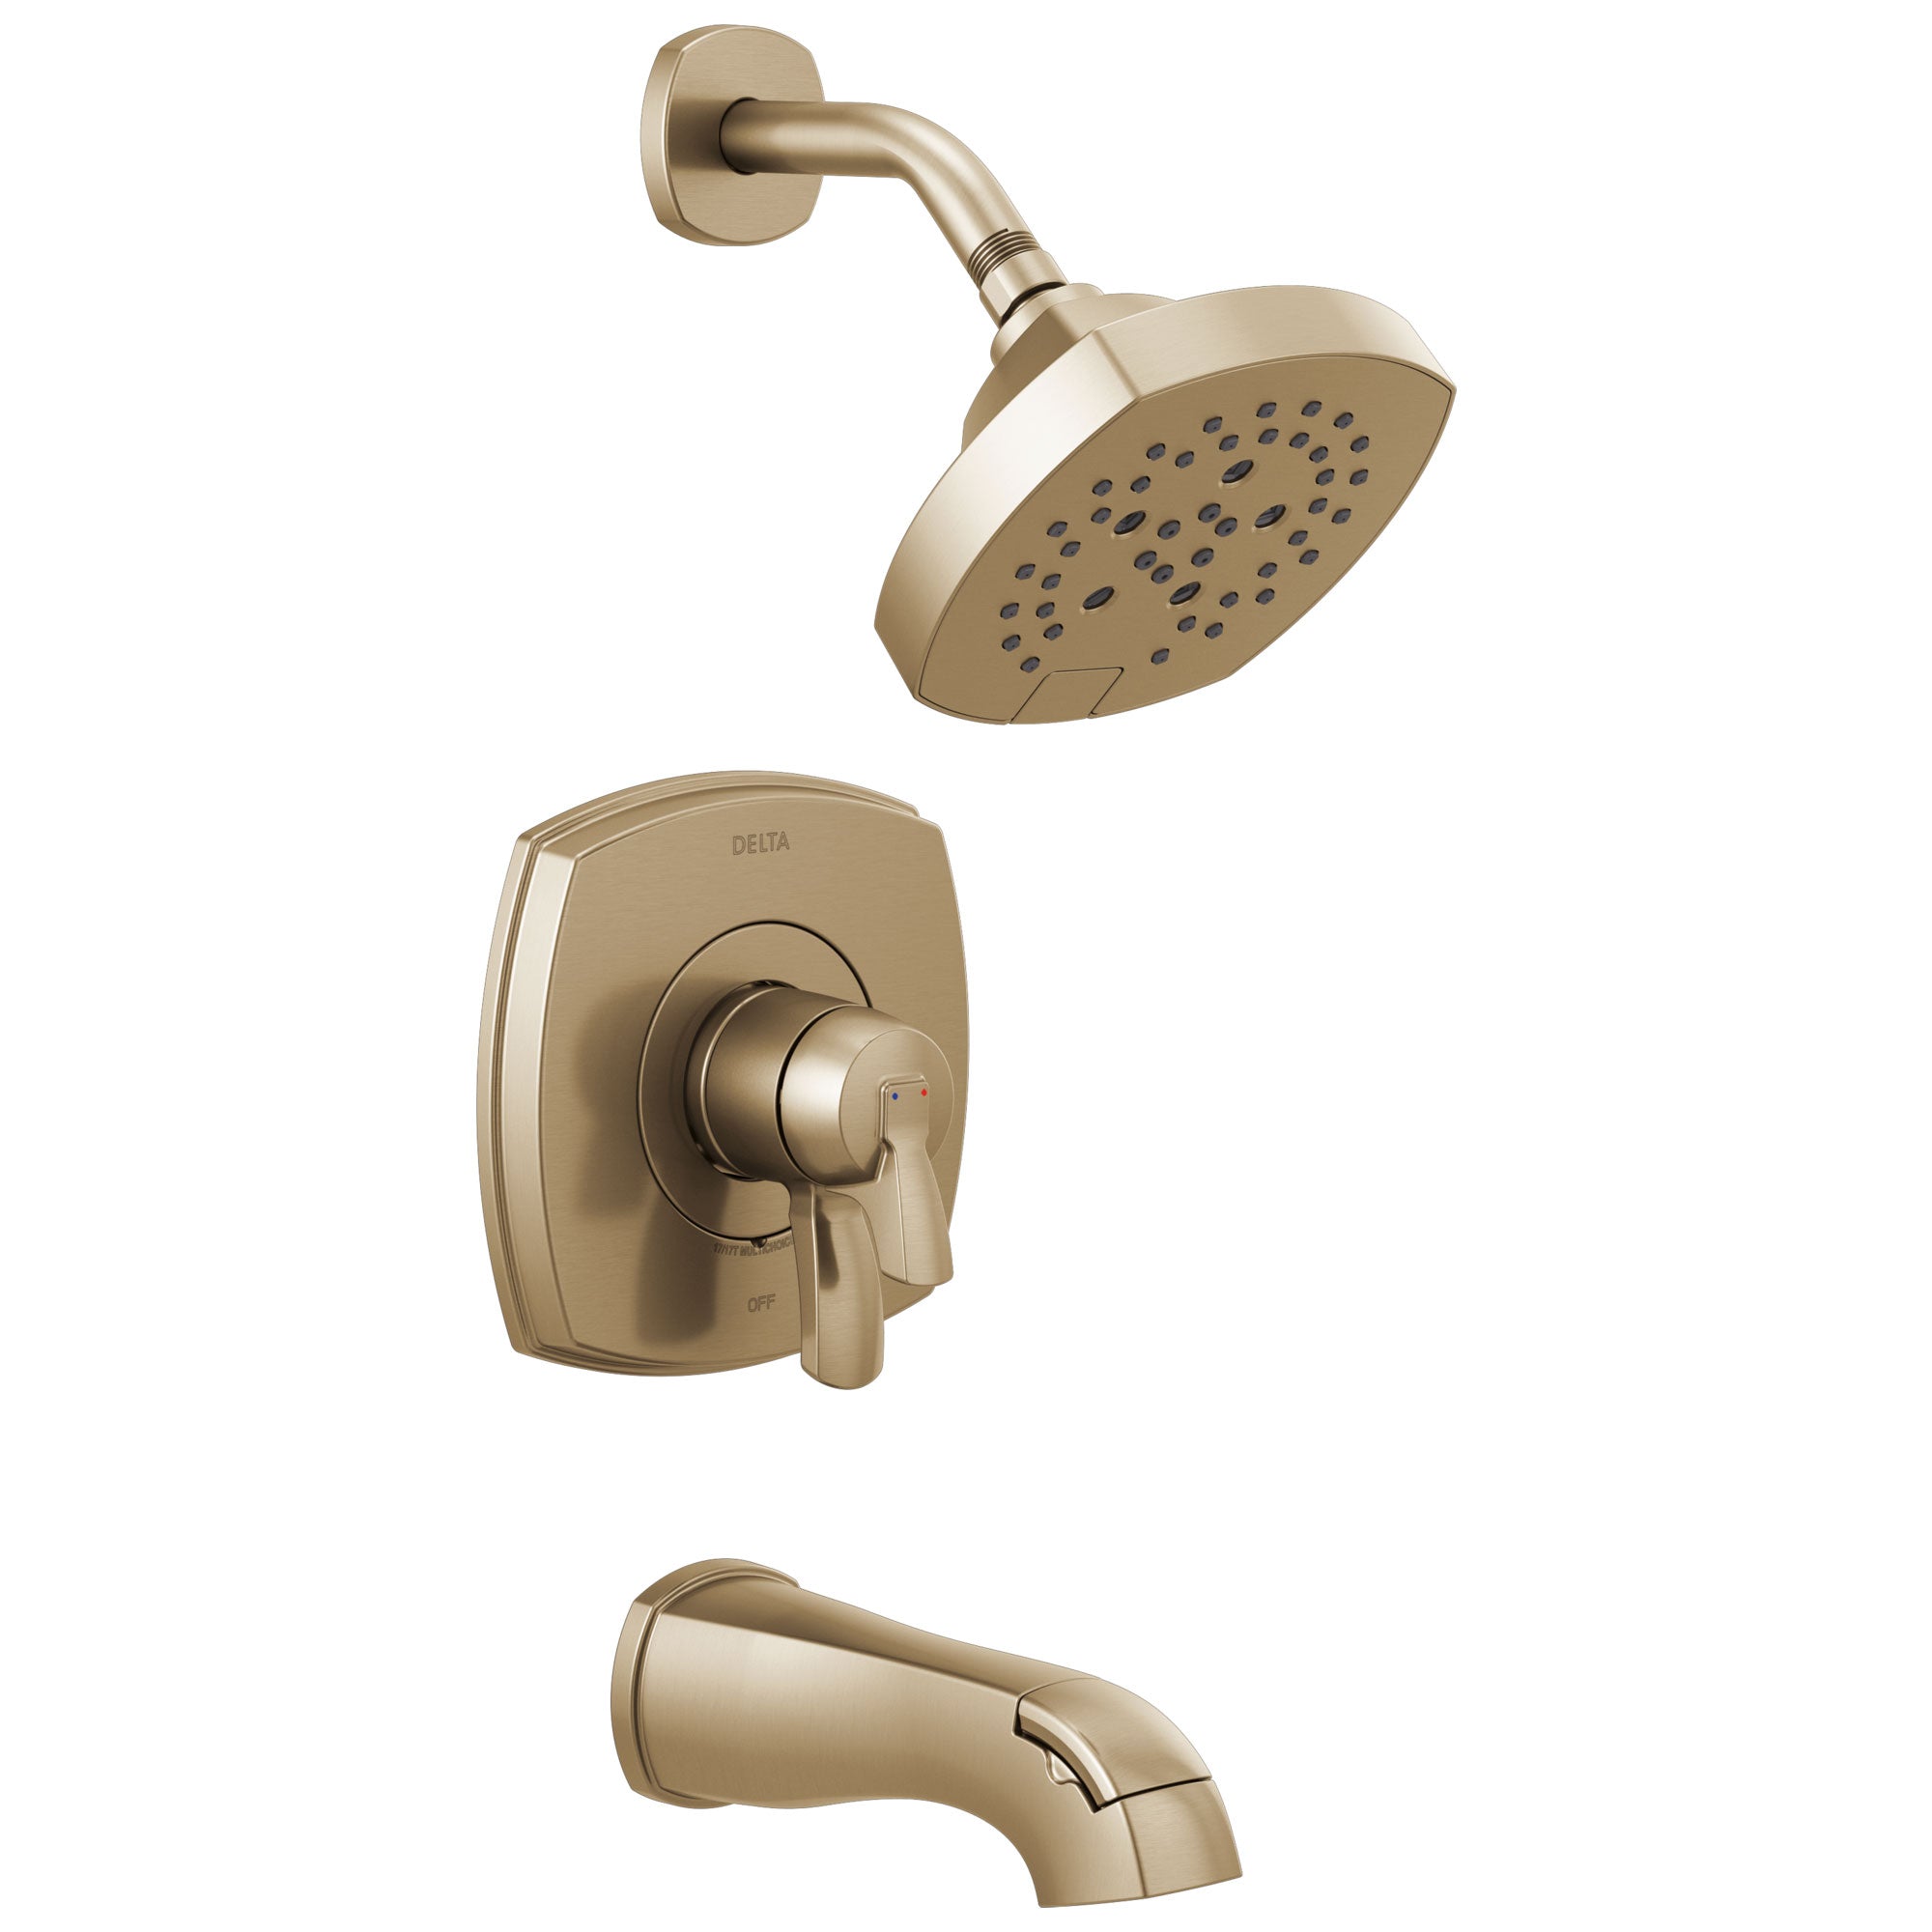 Delta Stryke Champagne Bronze Finish 17 Series Tub and Shower Combo Faucet Includes Handles, Cartridge, and Rough Valve with Stops D3332V